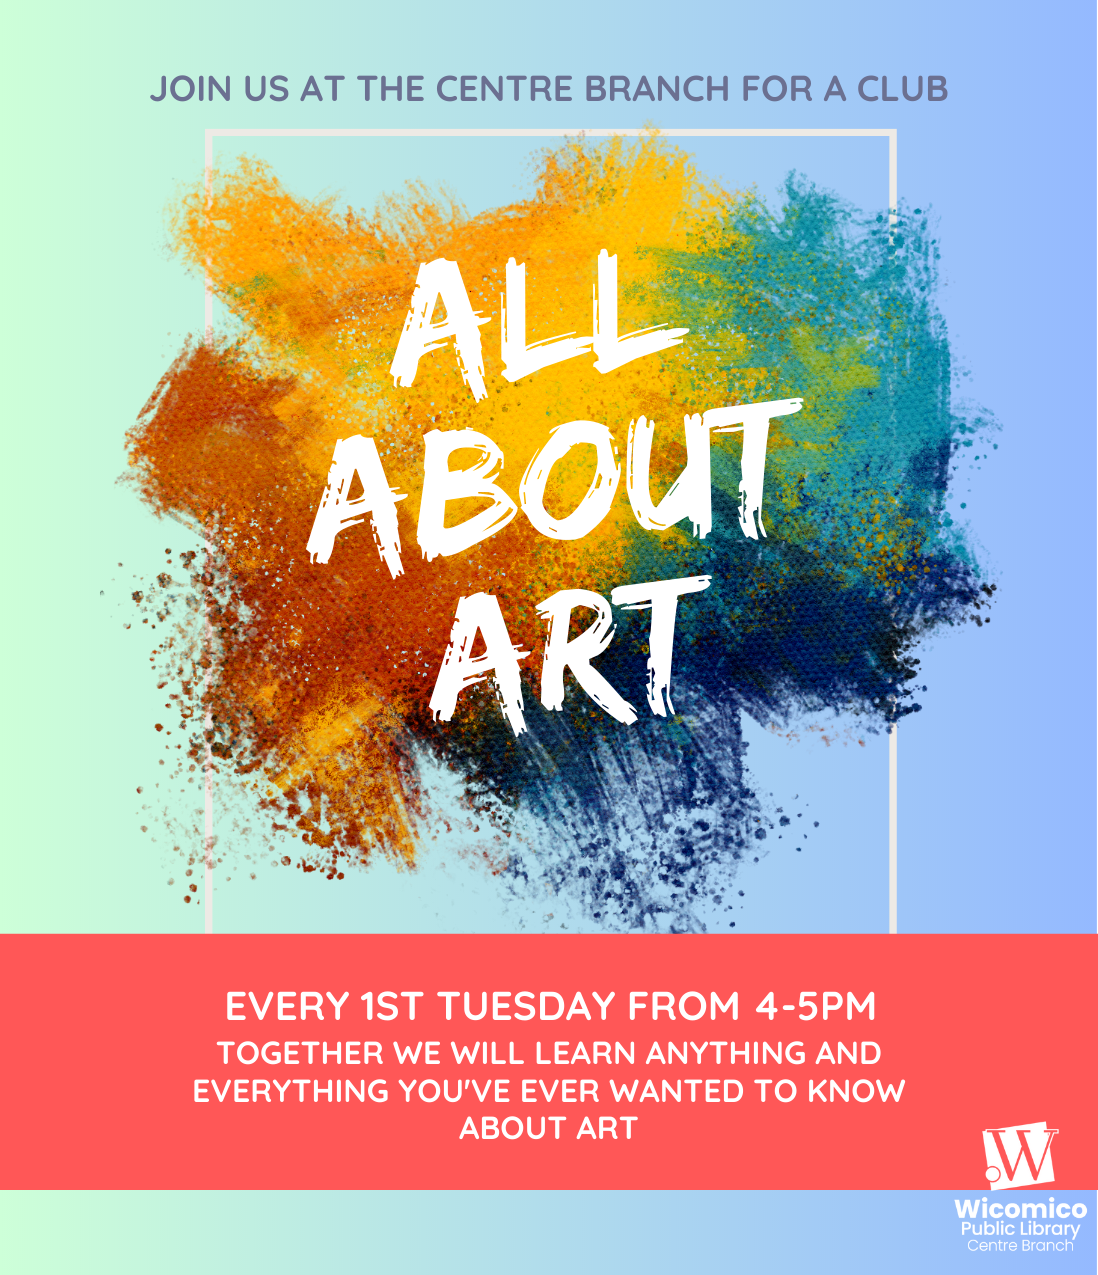 All About Art flyer. It reads: Join us at the Centre Branch for a club All About Art. Every 1st Tuesday from 4pm-5pm. Together we will learn anything and everything you've ever wanted to know about art.